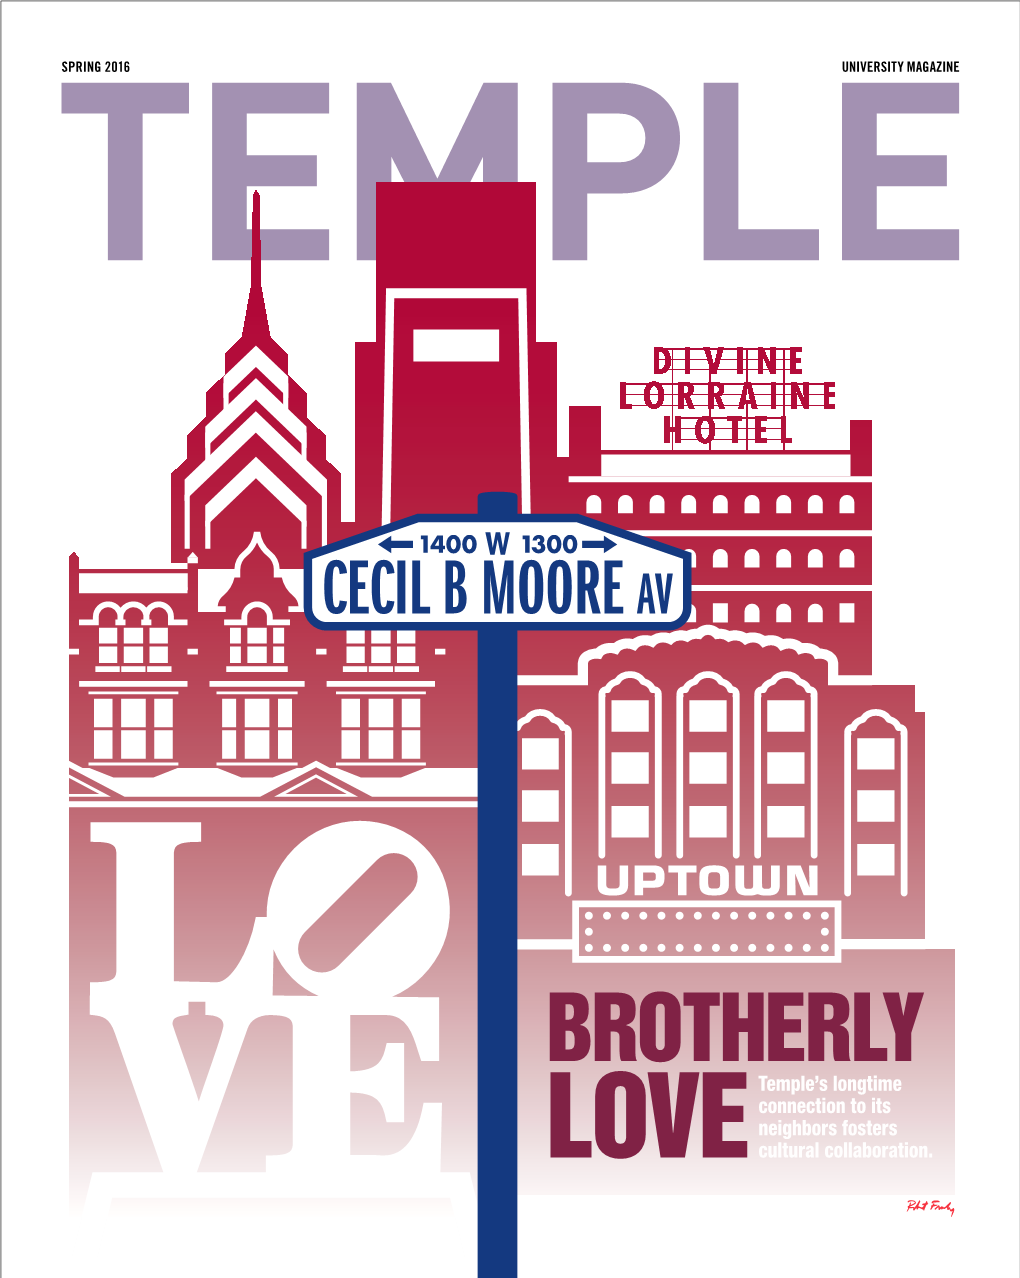 BROTHERLY Temple’S Longtime Connection to Its Neighbors Fosters LOVE Cultural Collaboration